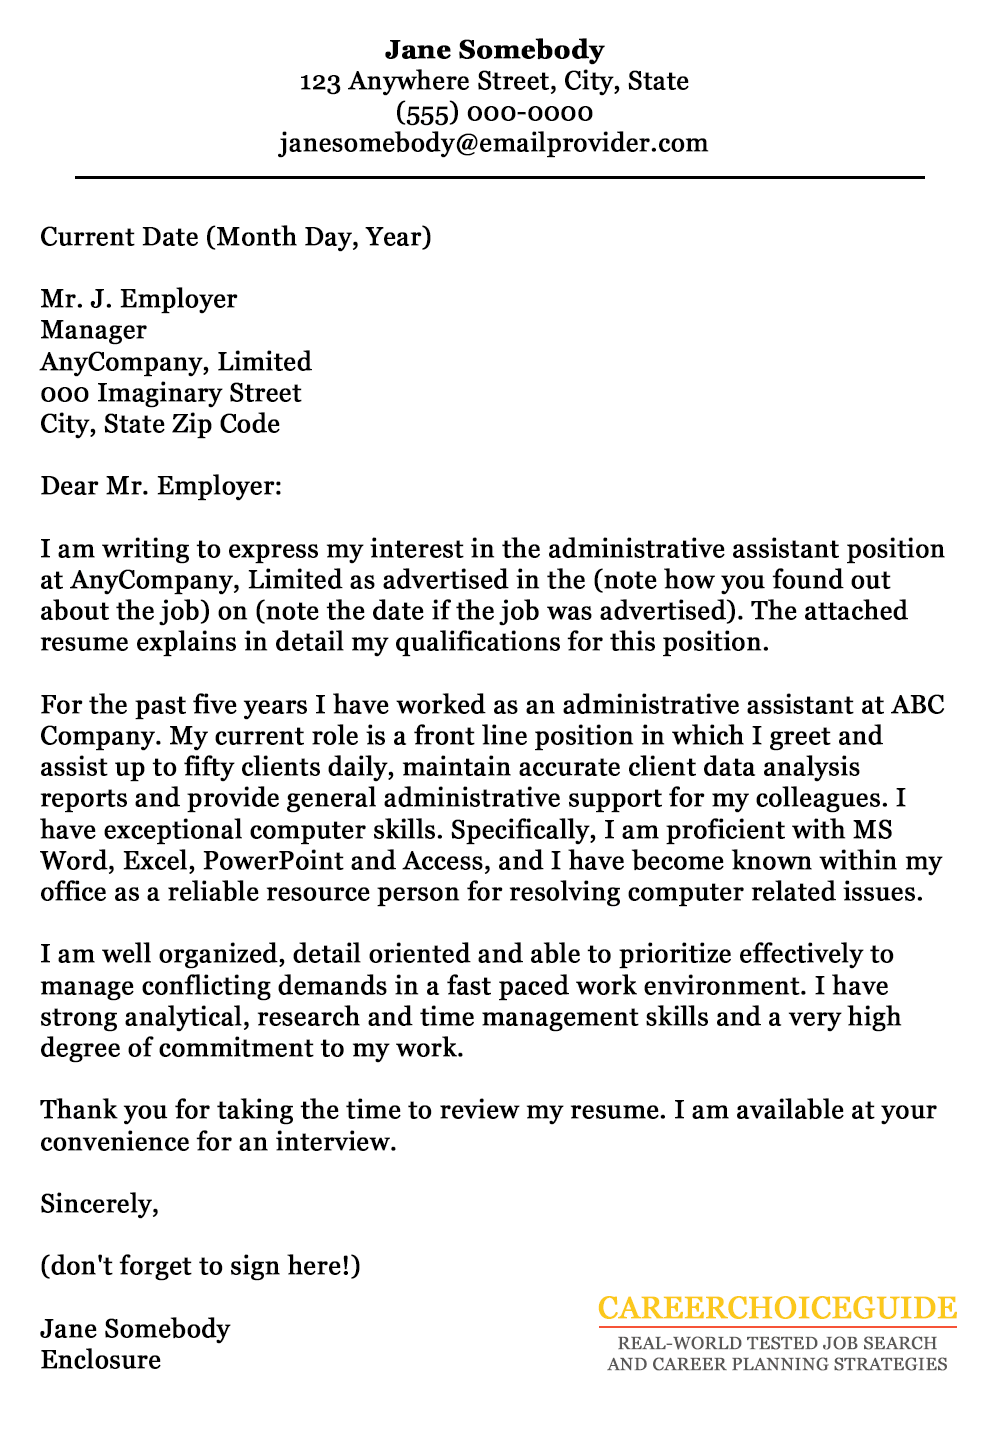 Formal Cover Letter Format from www.careerchoiceguide.com